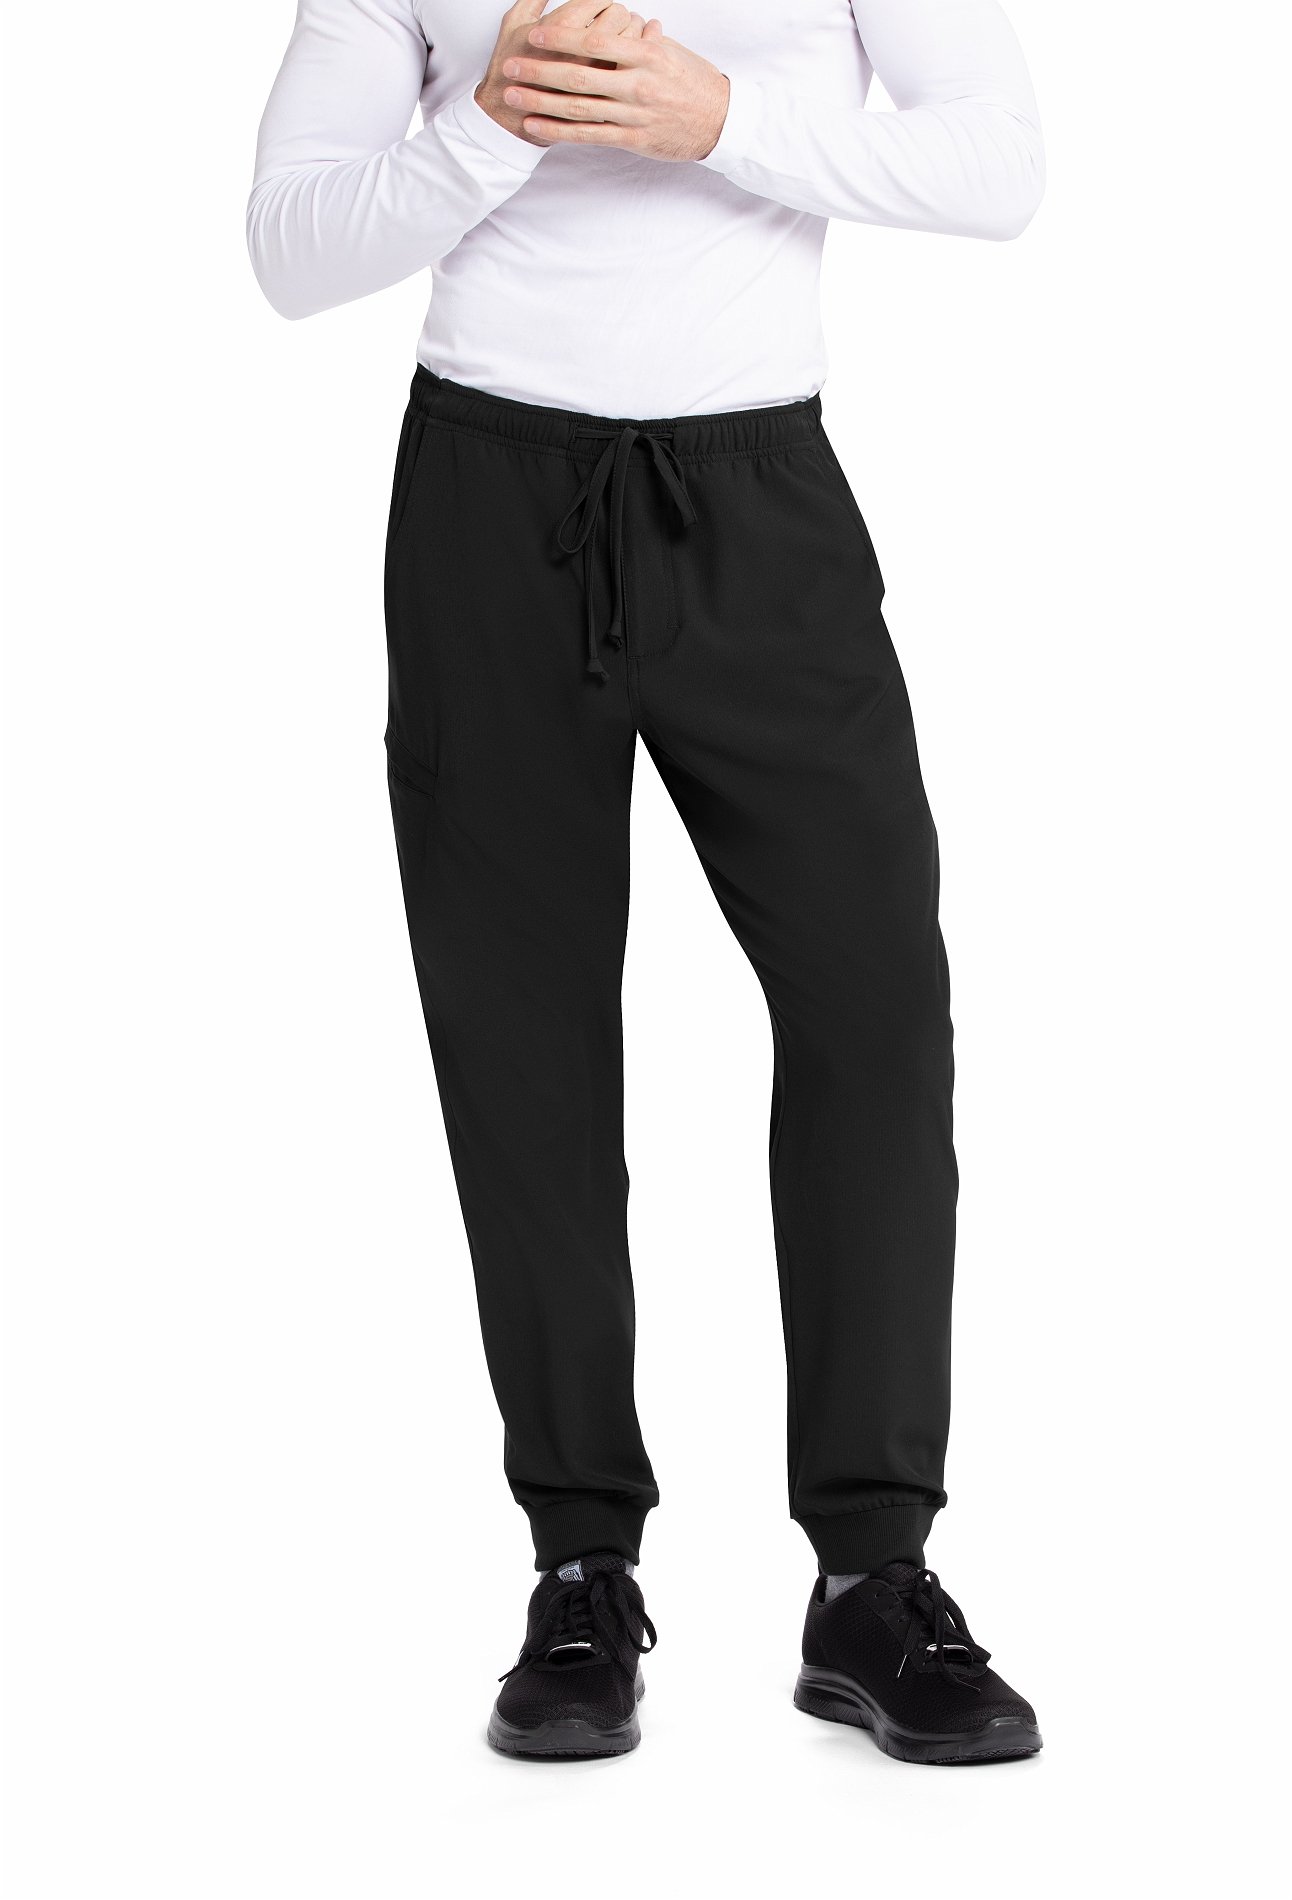 https://medicalscrubscollection.com/content/images/thumbs/0757901_skechers-by-barco-mens-vitality-jogger-scrub-pants-skp551.jpeg